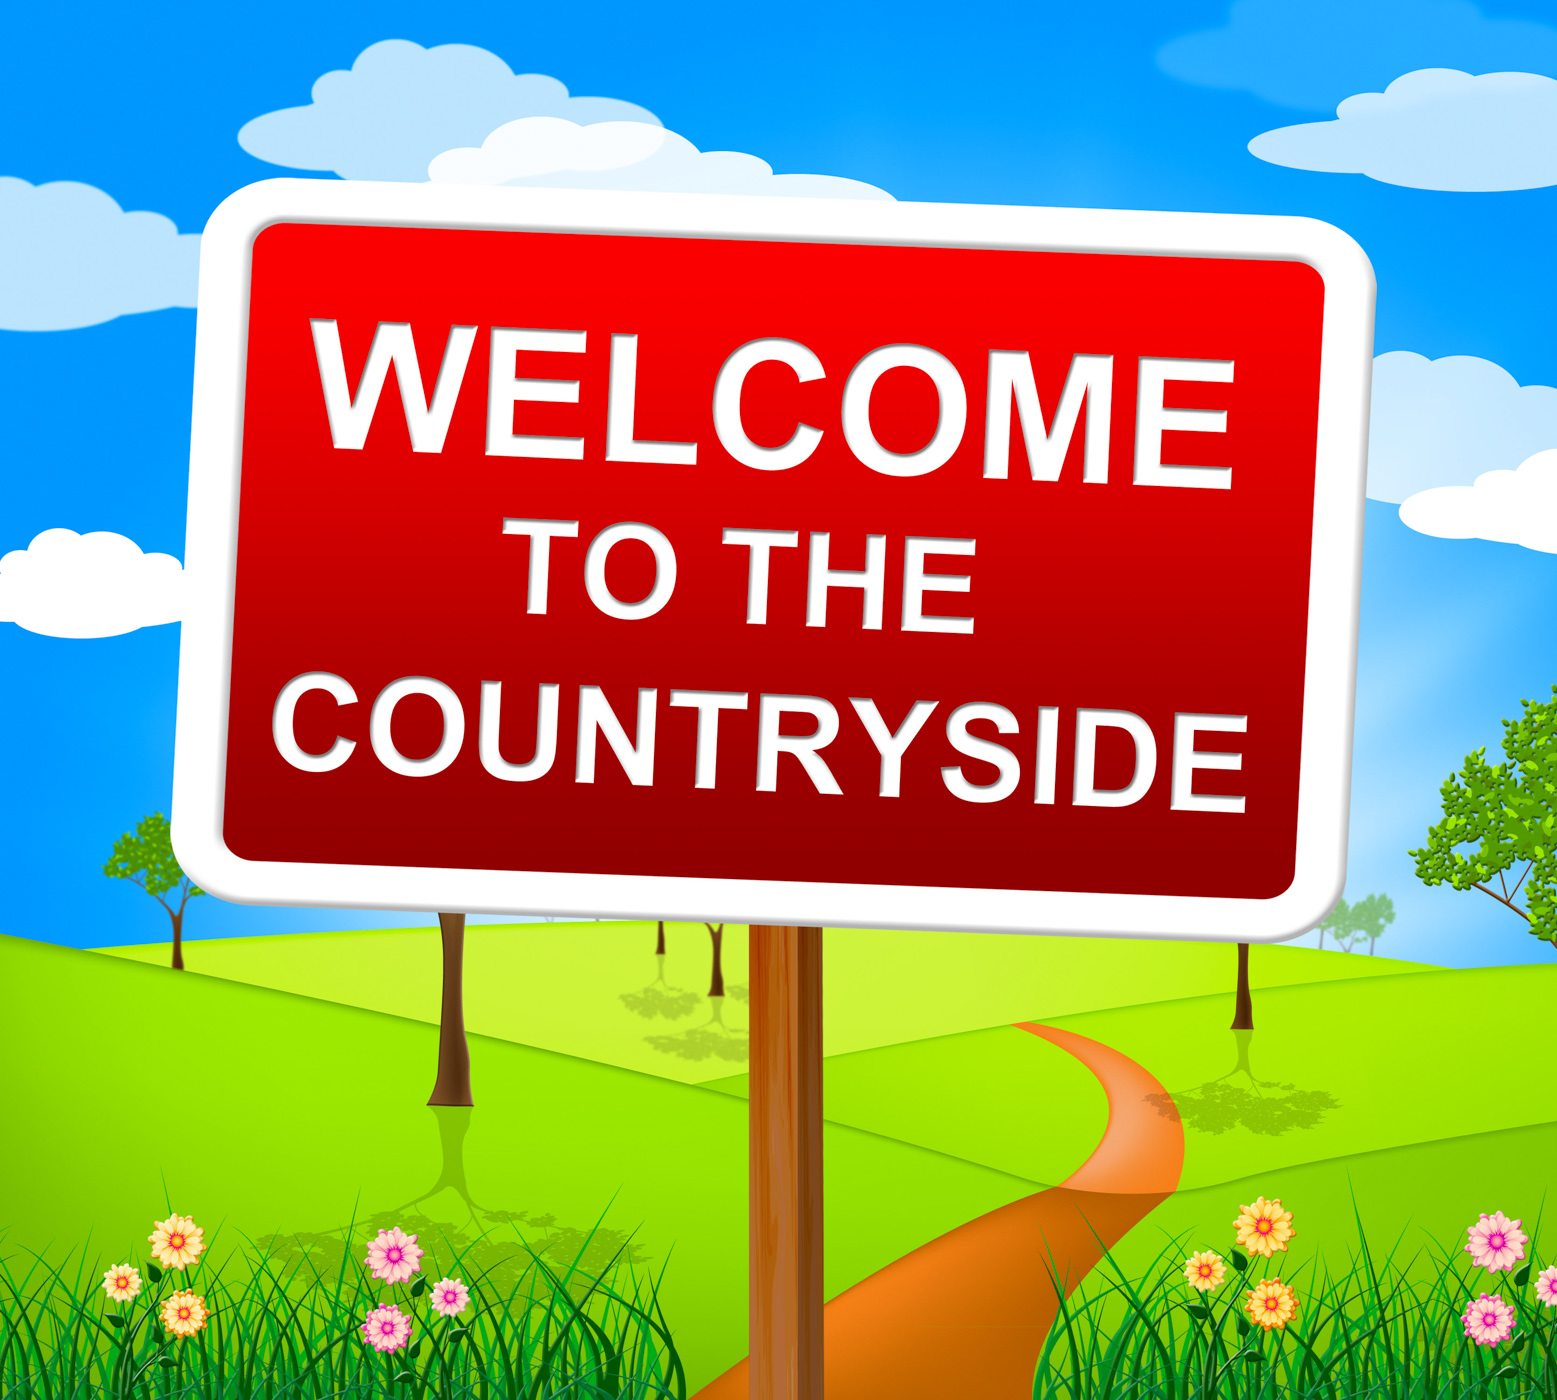 Welcoming meaning. Welcome to countryside.